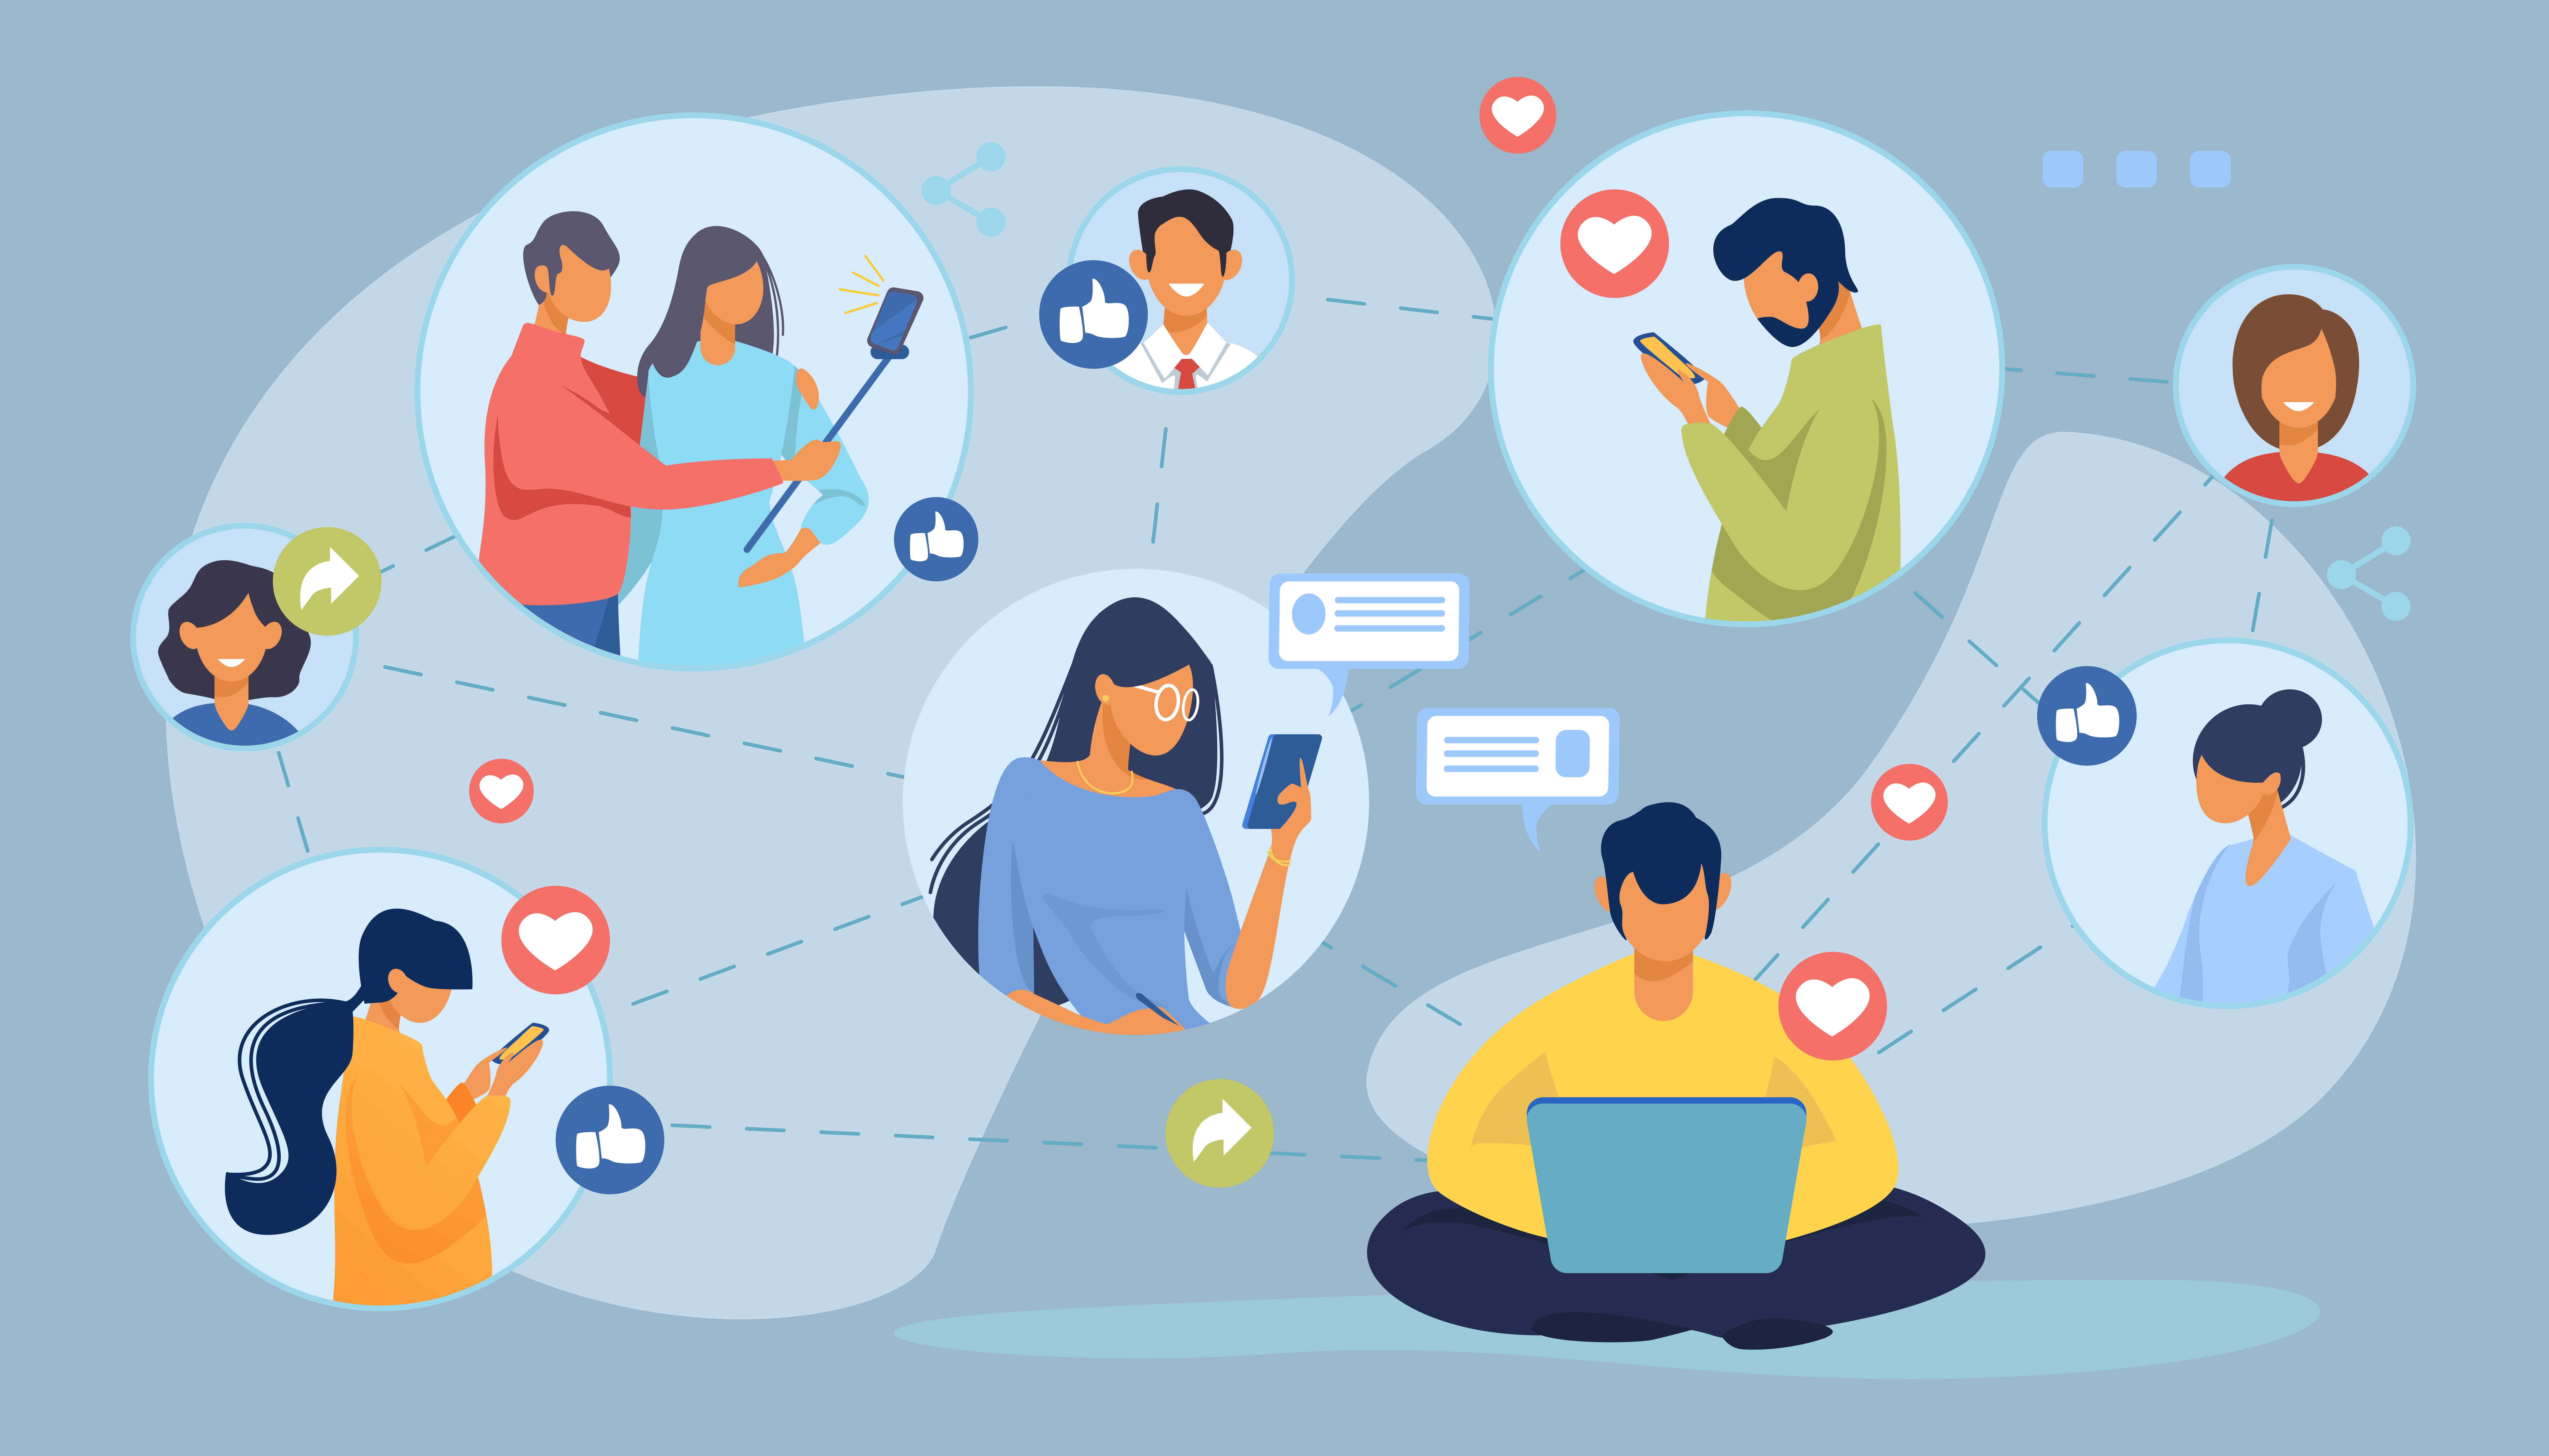 Social media network. Connected users taking pictures, posting, chatting flat vector illustration. Internet, connection, communication concept for banner, website design or landing web page